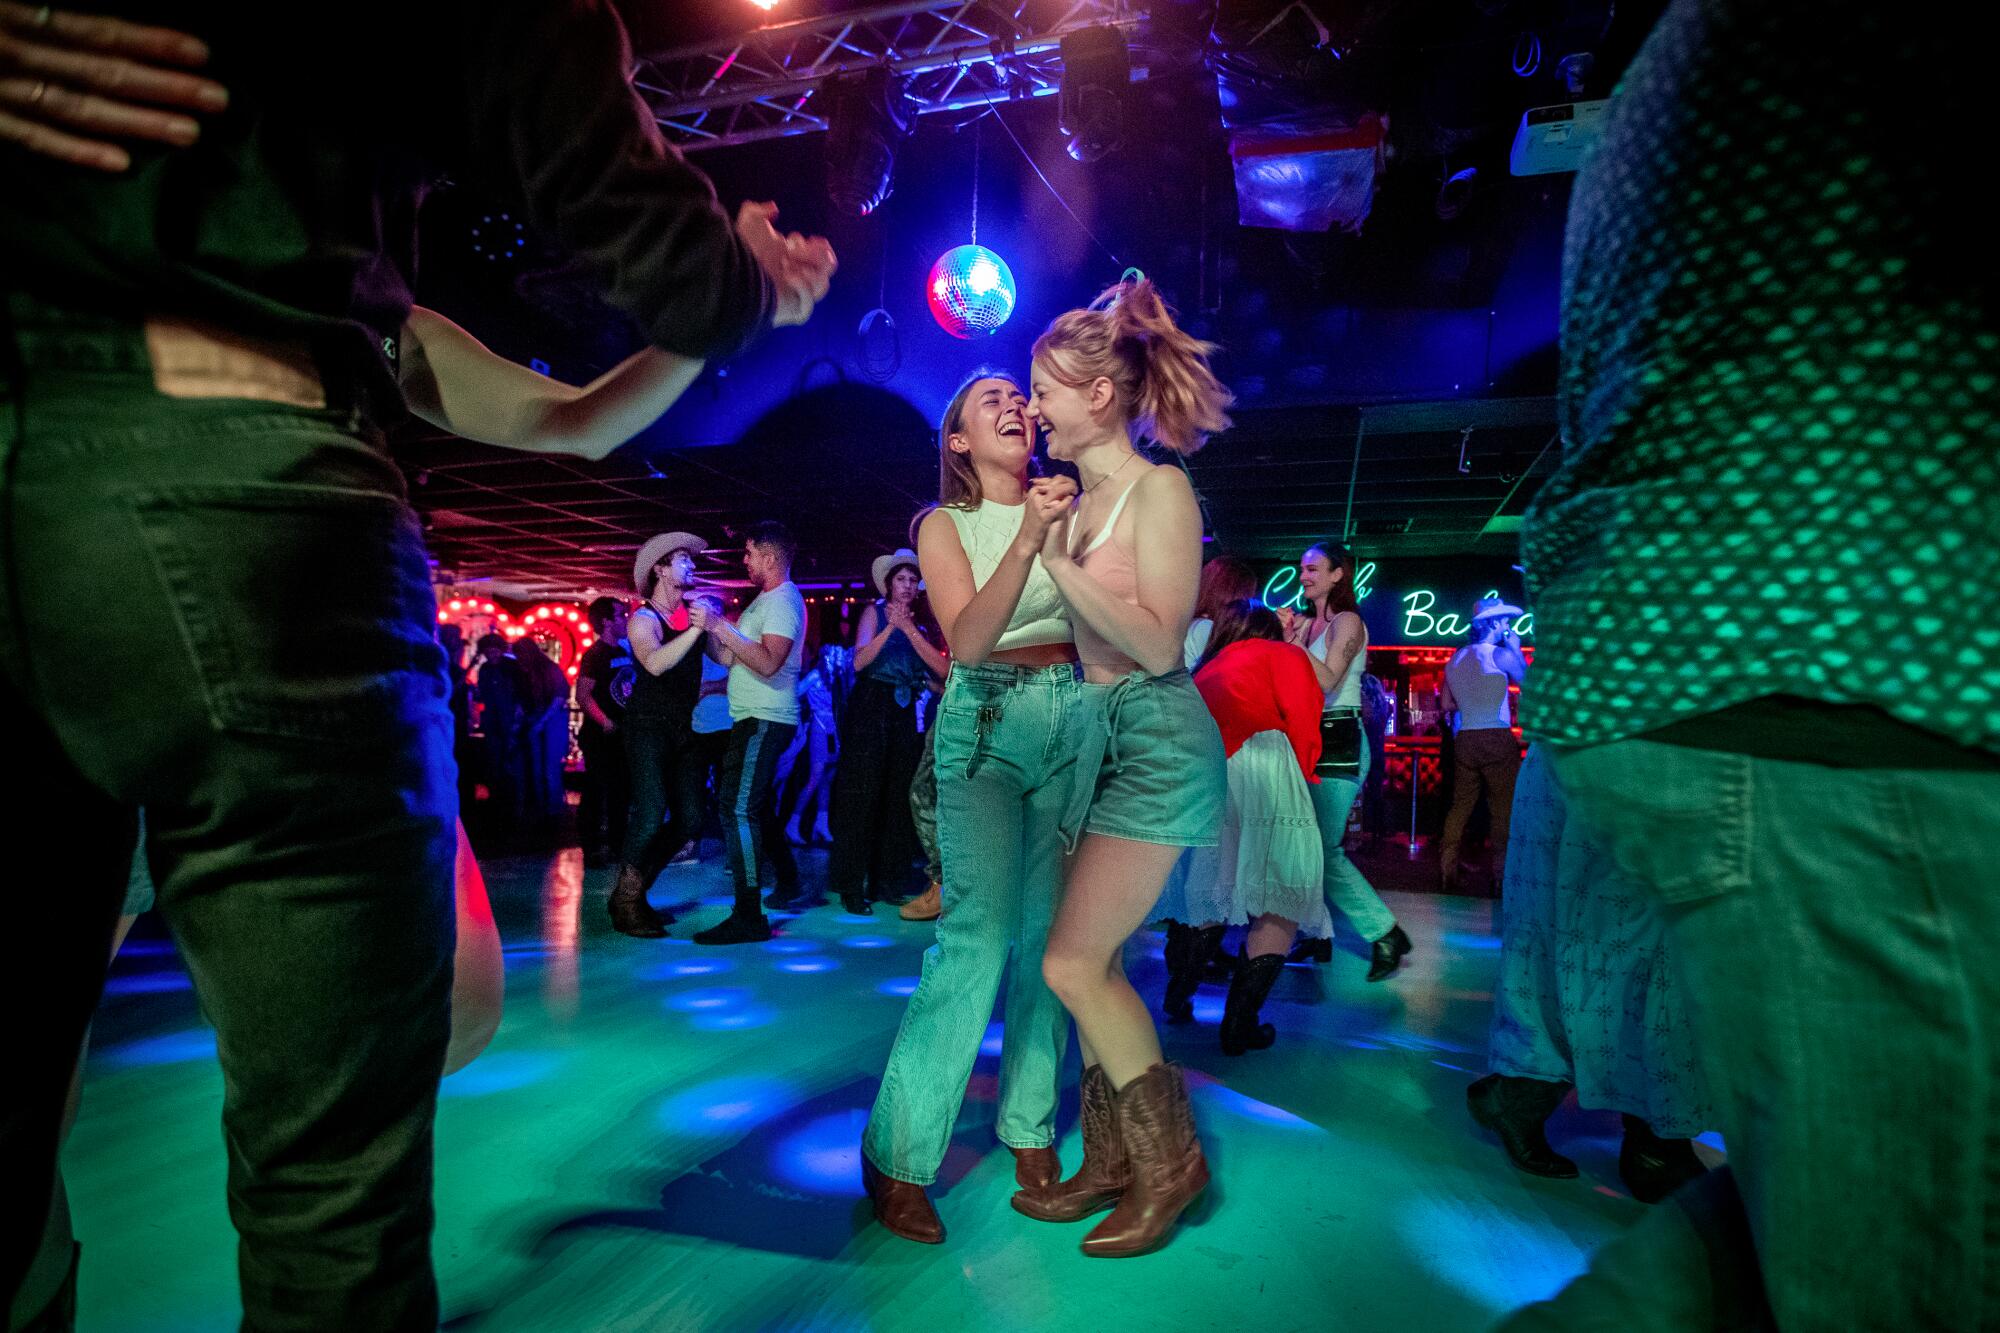 Couples dance at a queer line dancing night at Club Bahia.